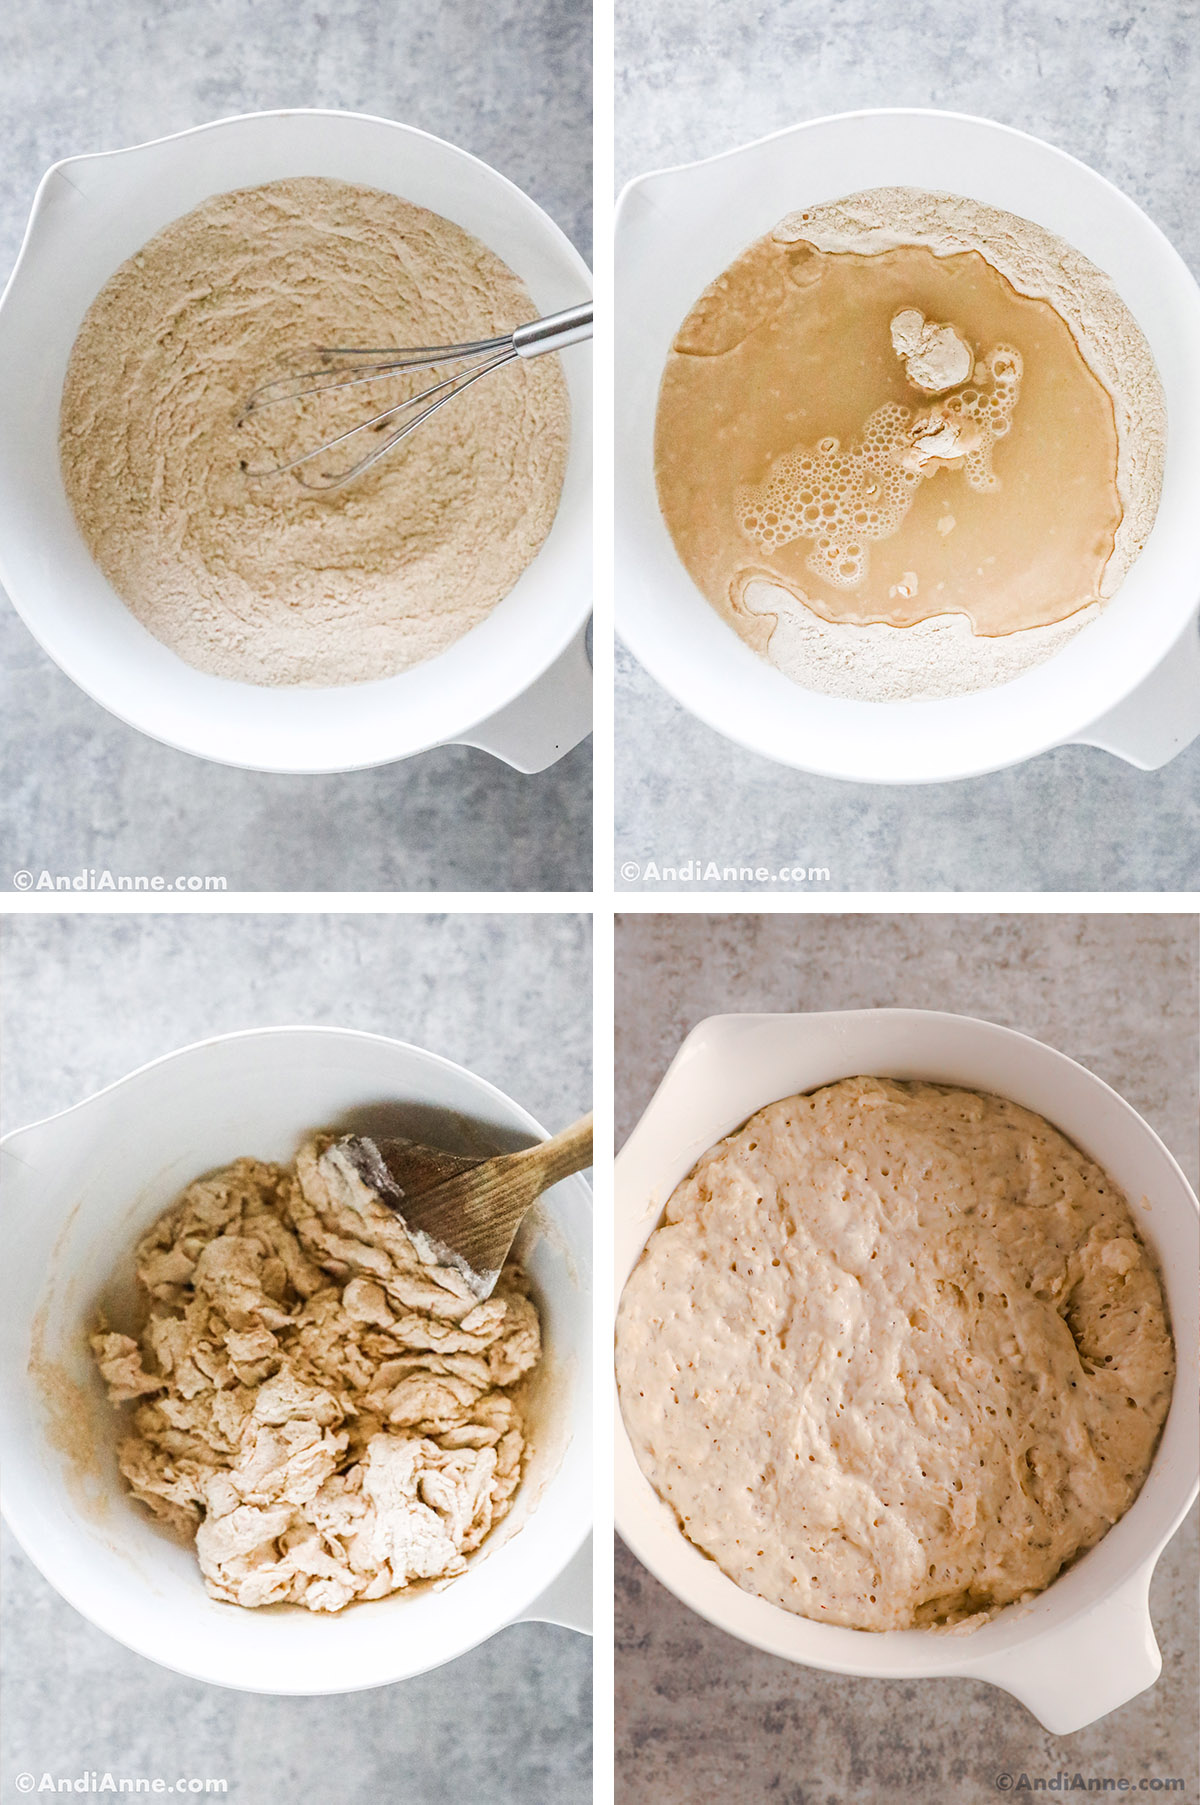 Images of a white bowl with bread dough ingredients in various stages.